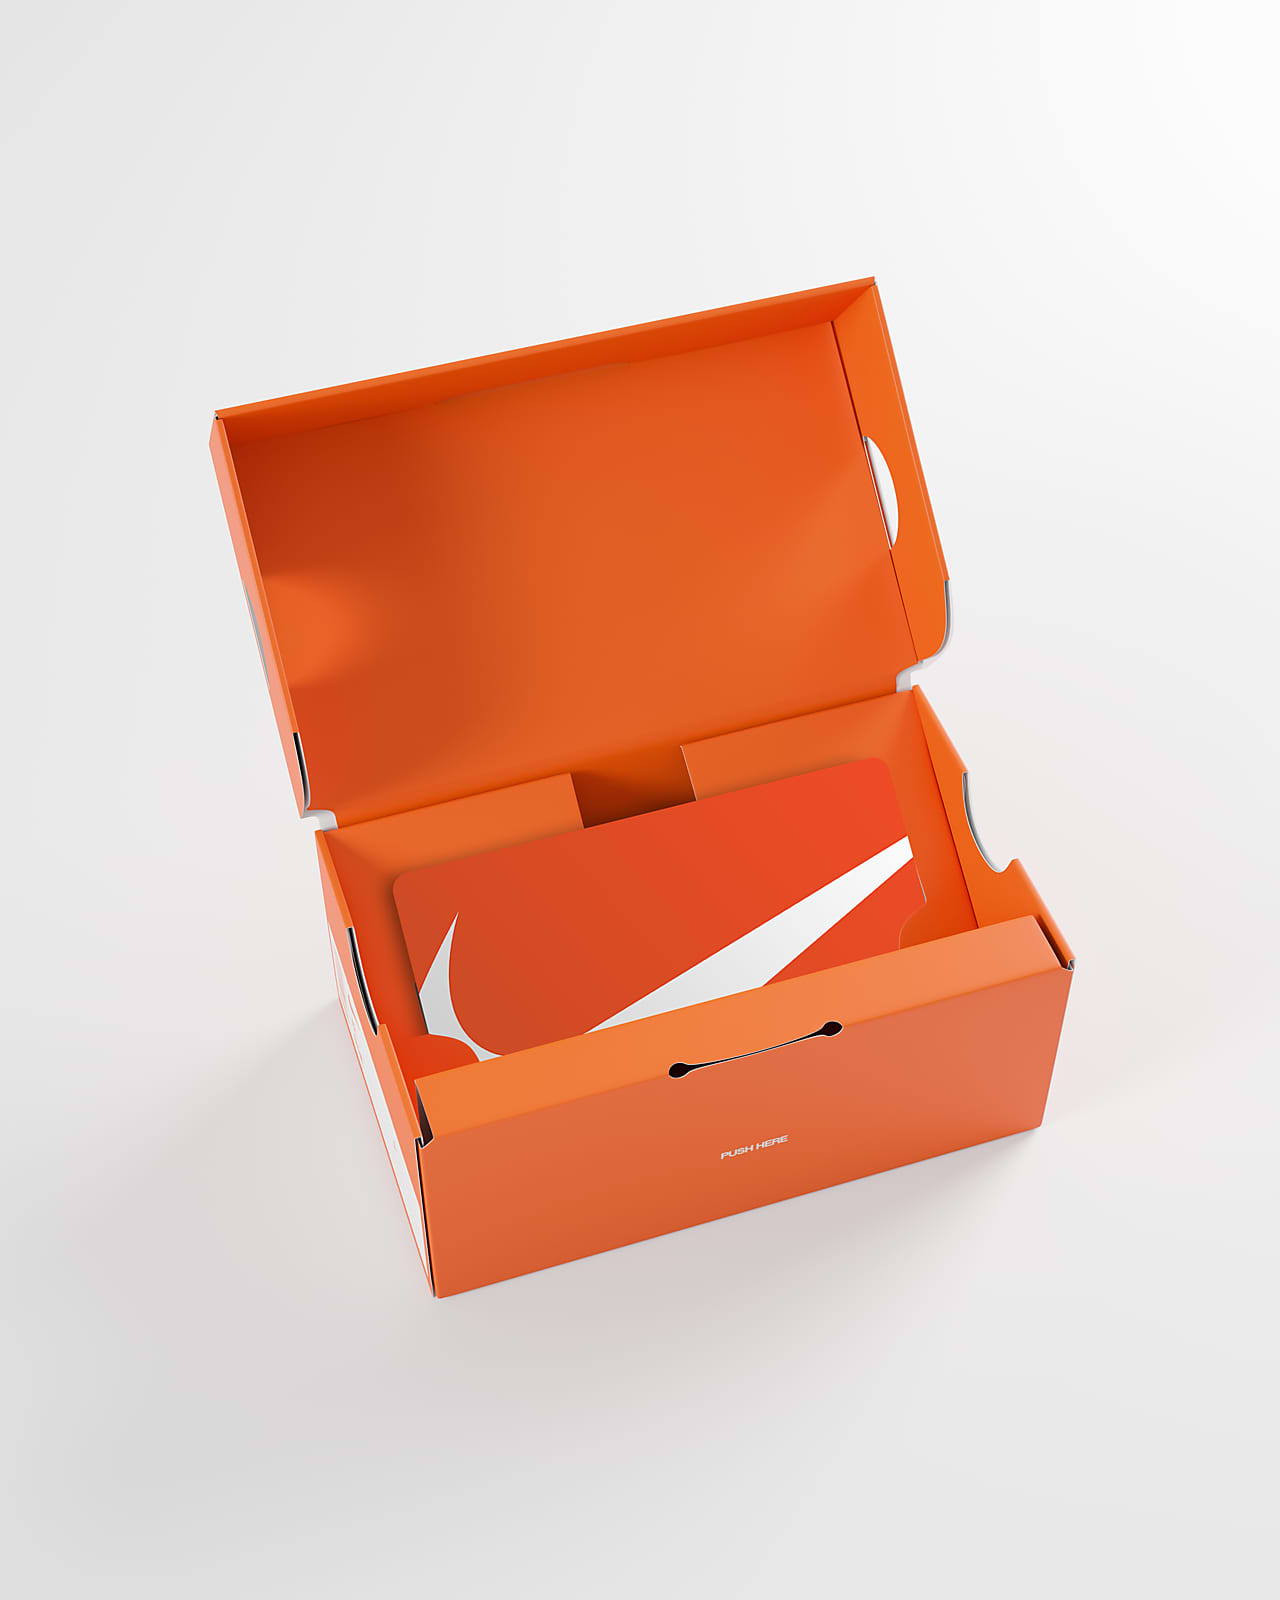 nike shoes gift card